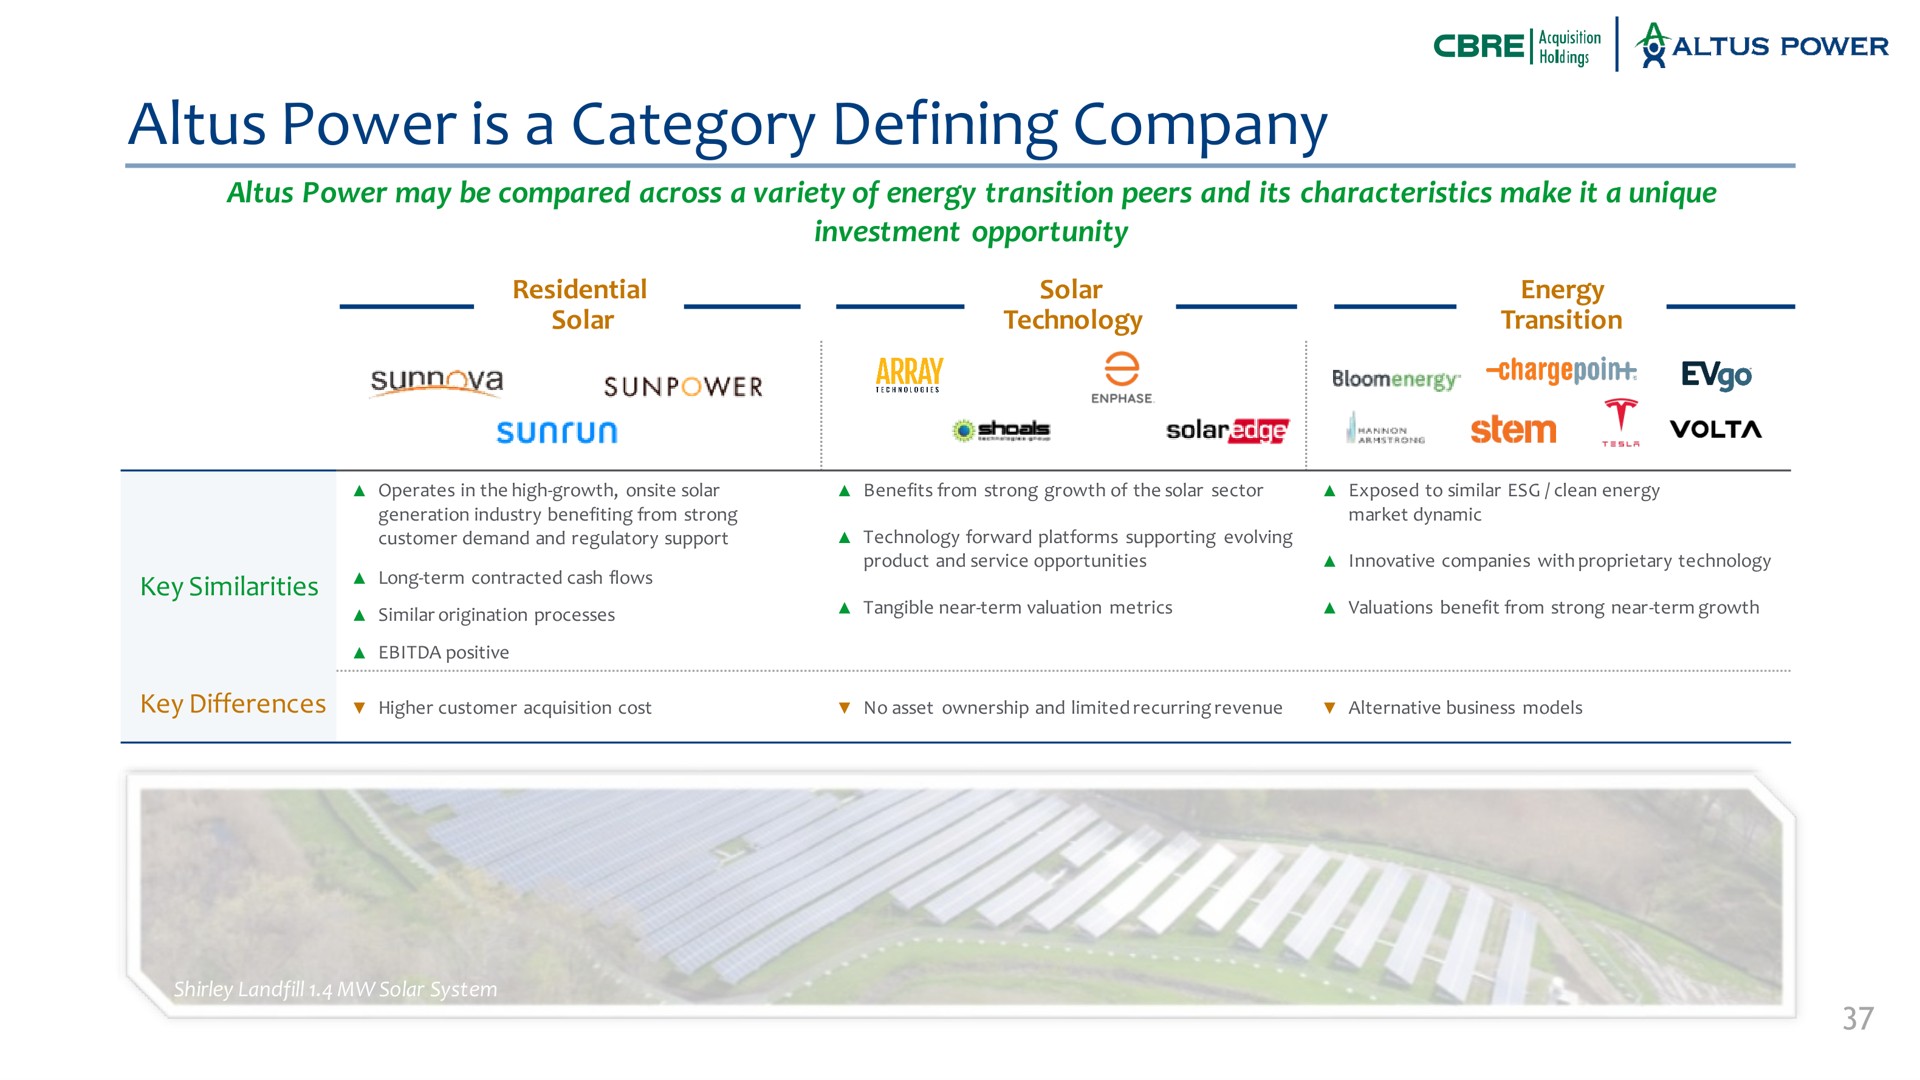 power is a category defining company may be compared across variety of energy transition peers and its characteristics make it unique investment opportunity shoals stem | Altus Power